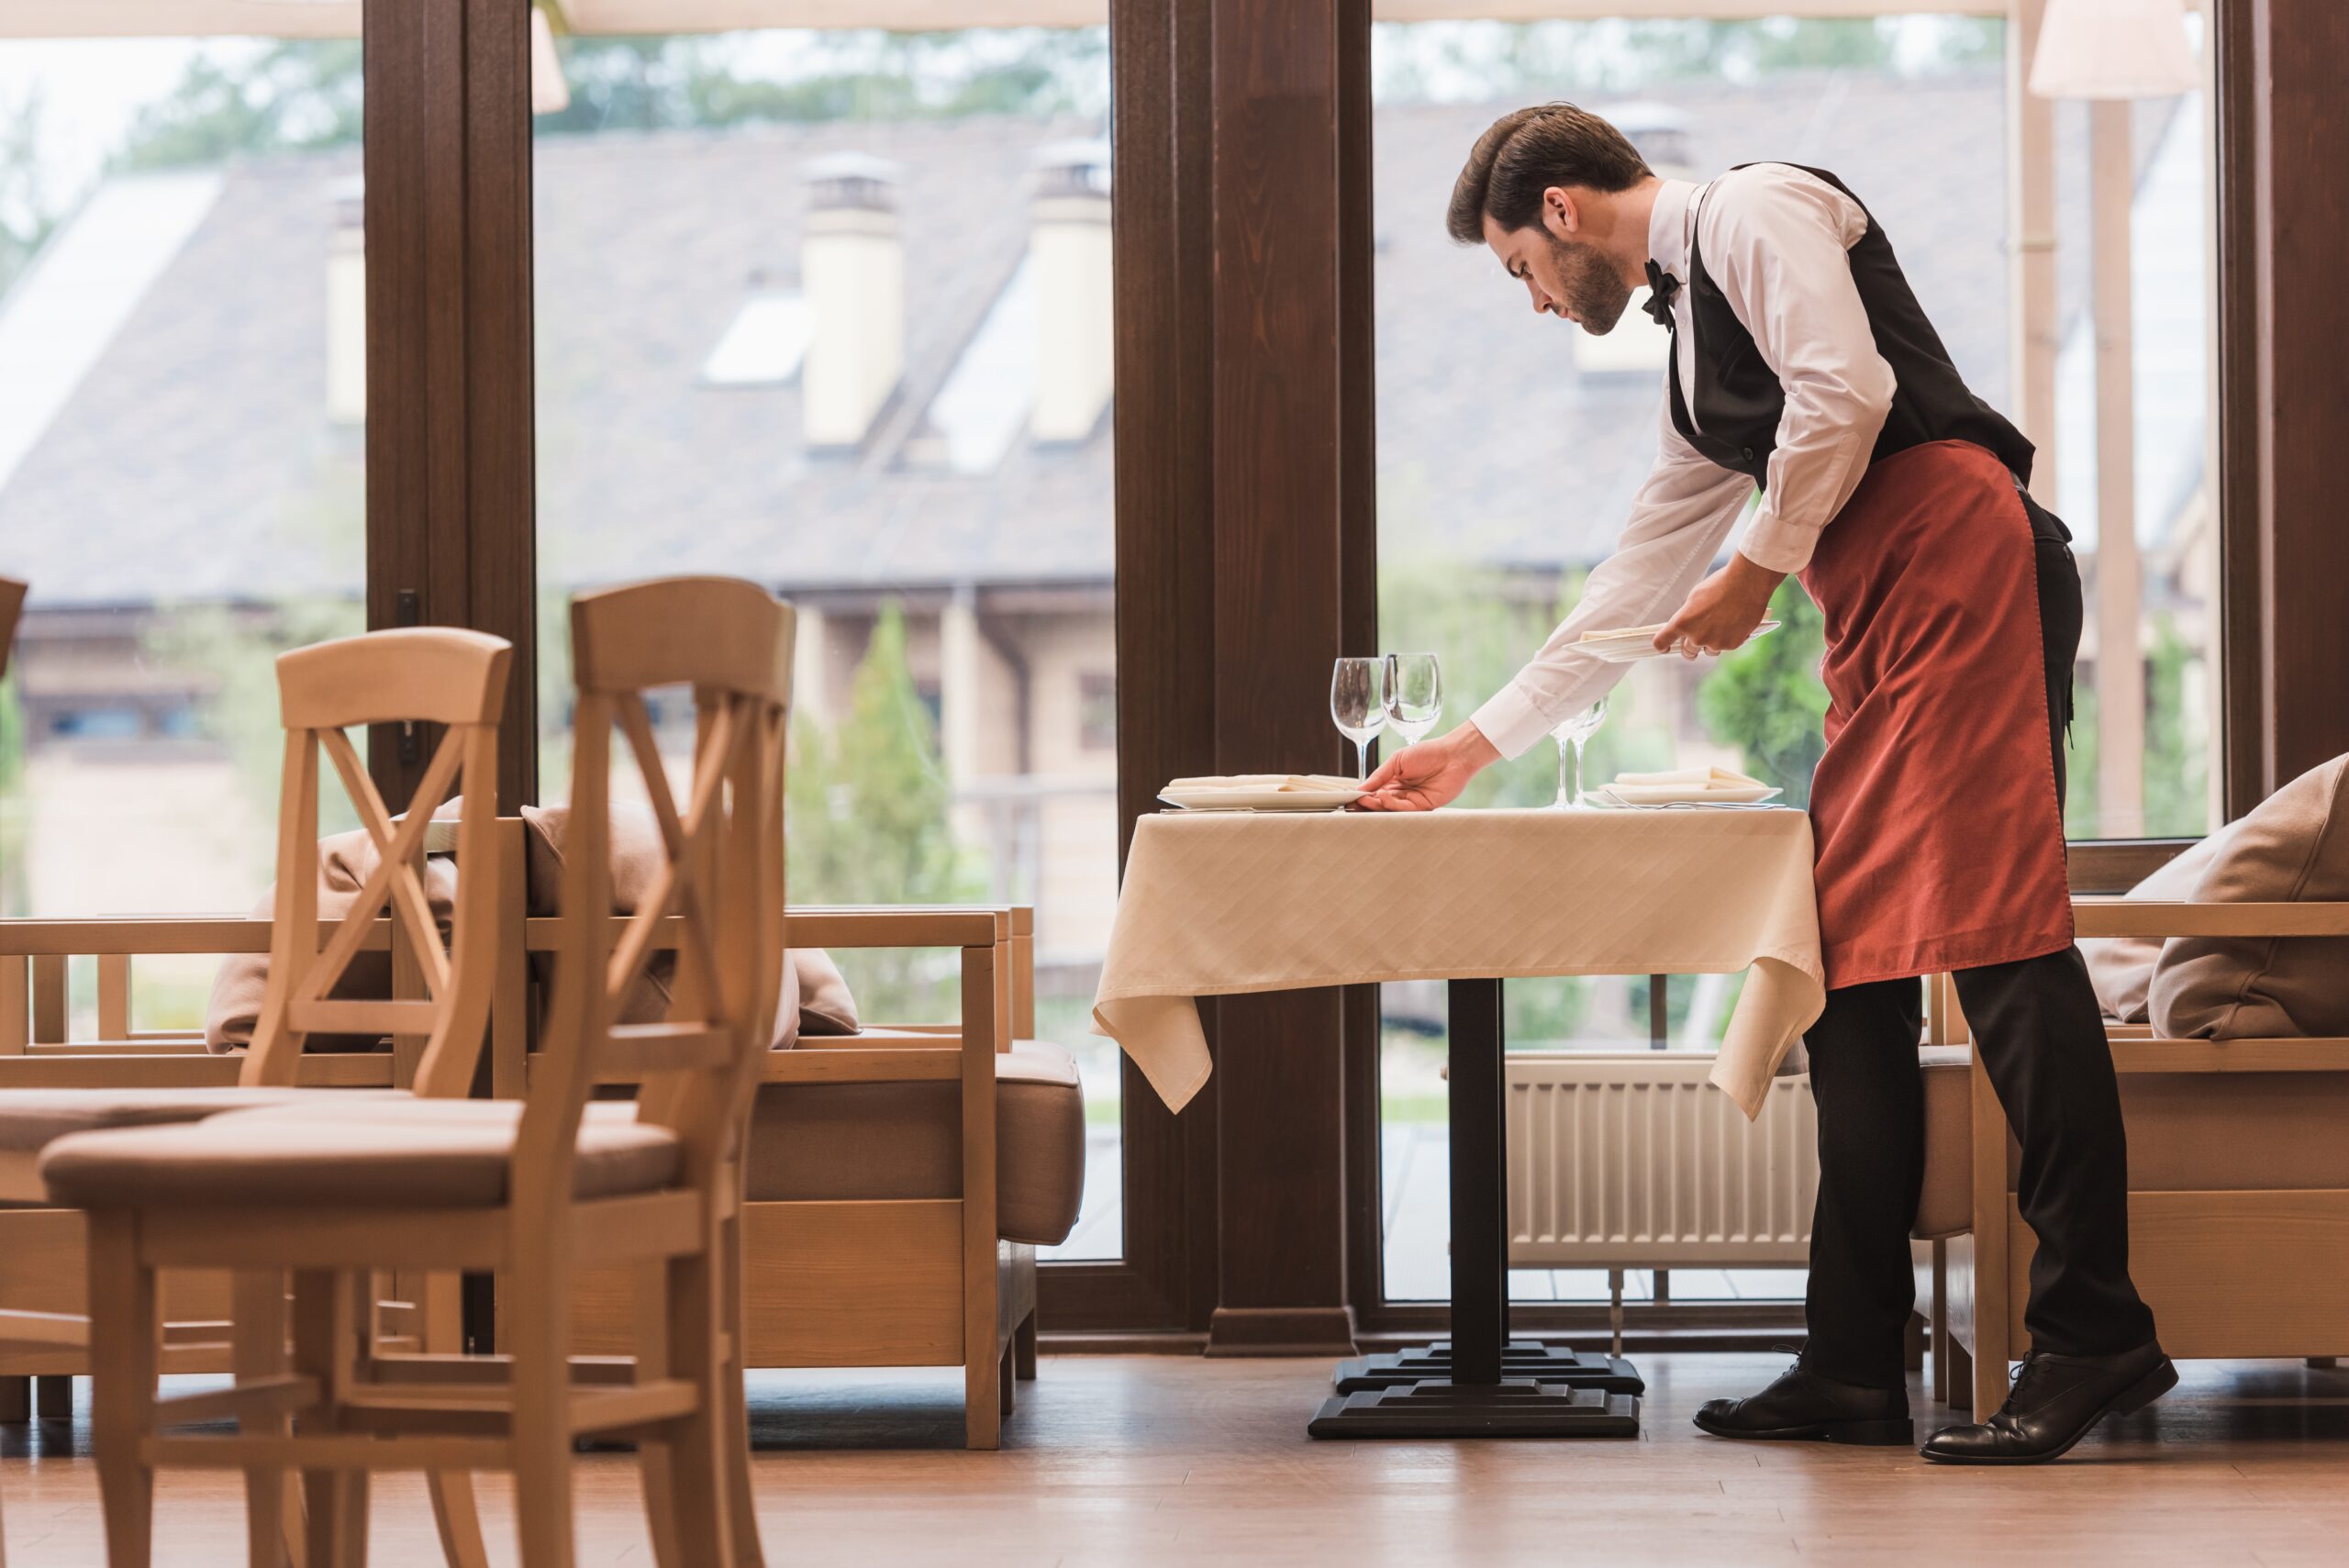 Side view of Waiter serving plates on a table at the restaurant